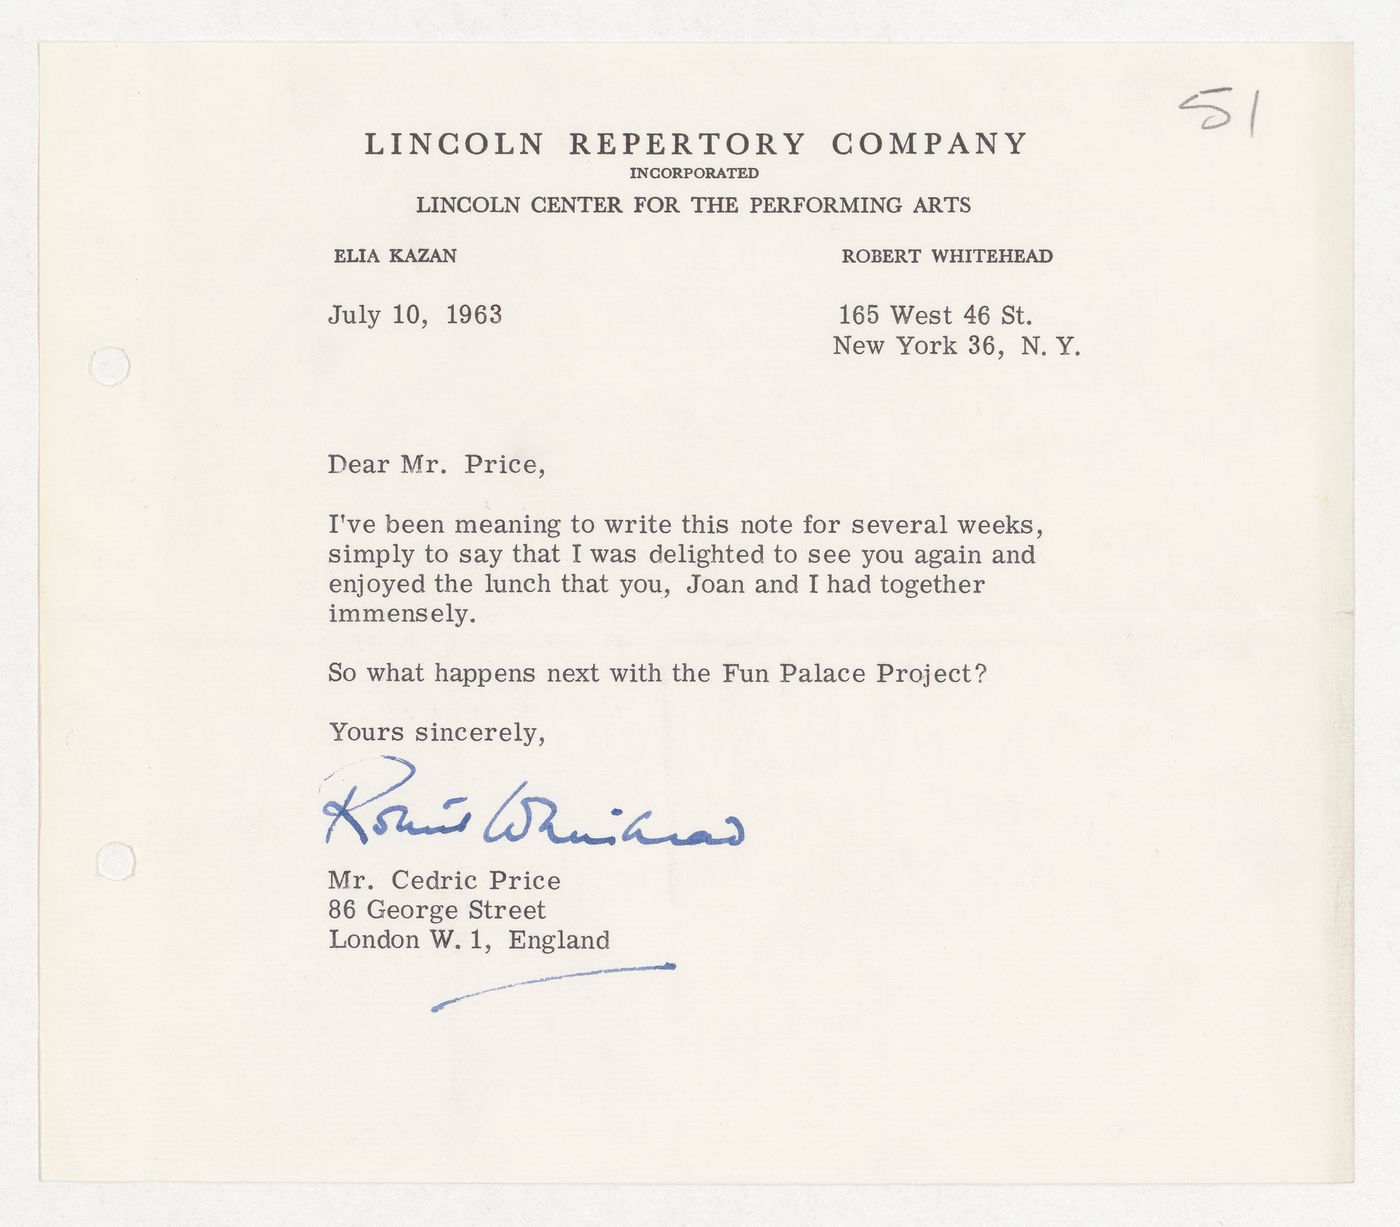 Letter from Robert Whitehead from the Lincoln Repertory Company to Cedric Price regarding the Fun Palace Project